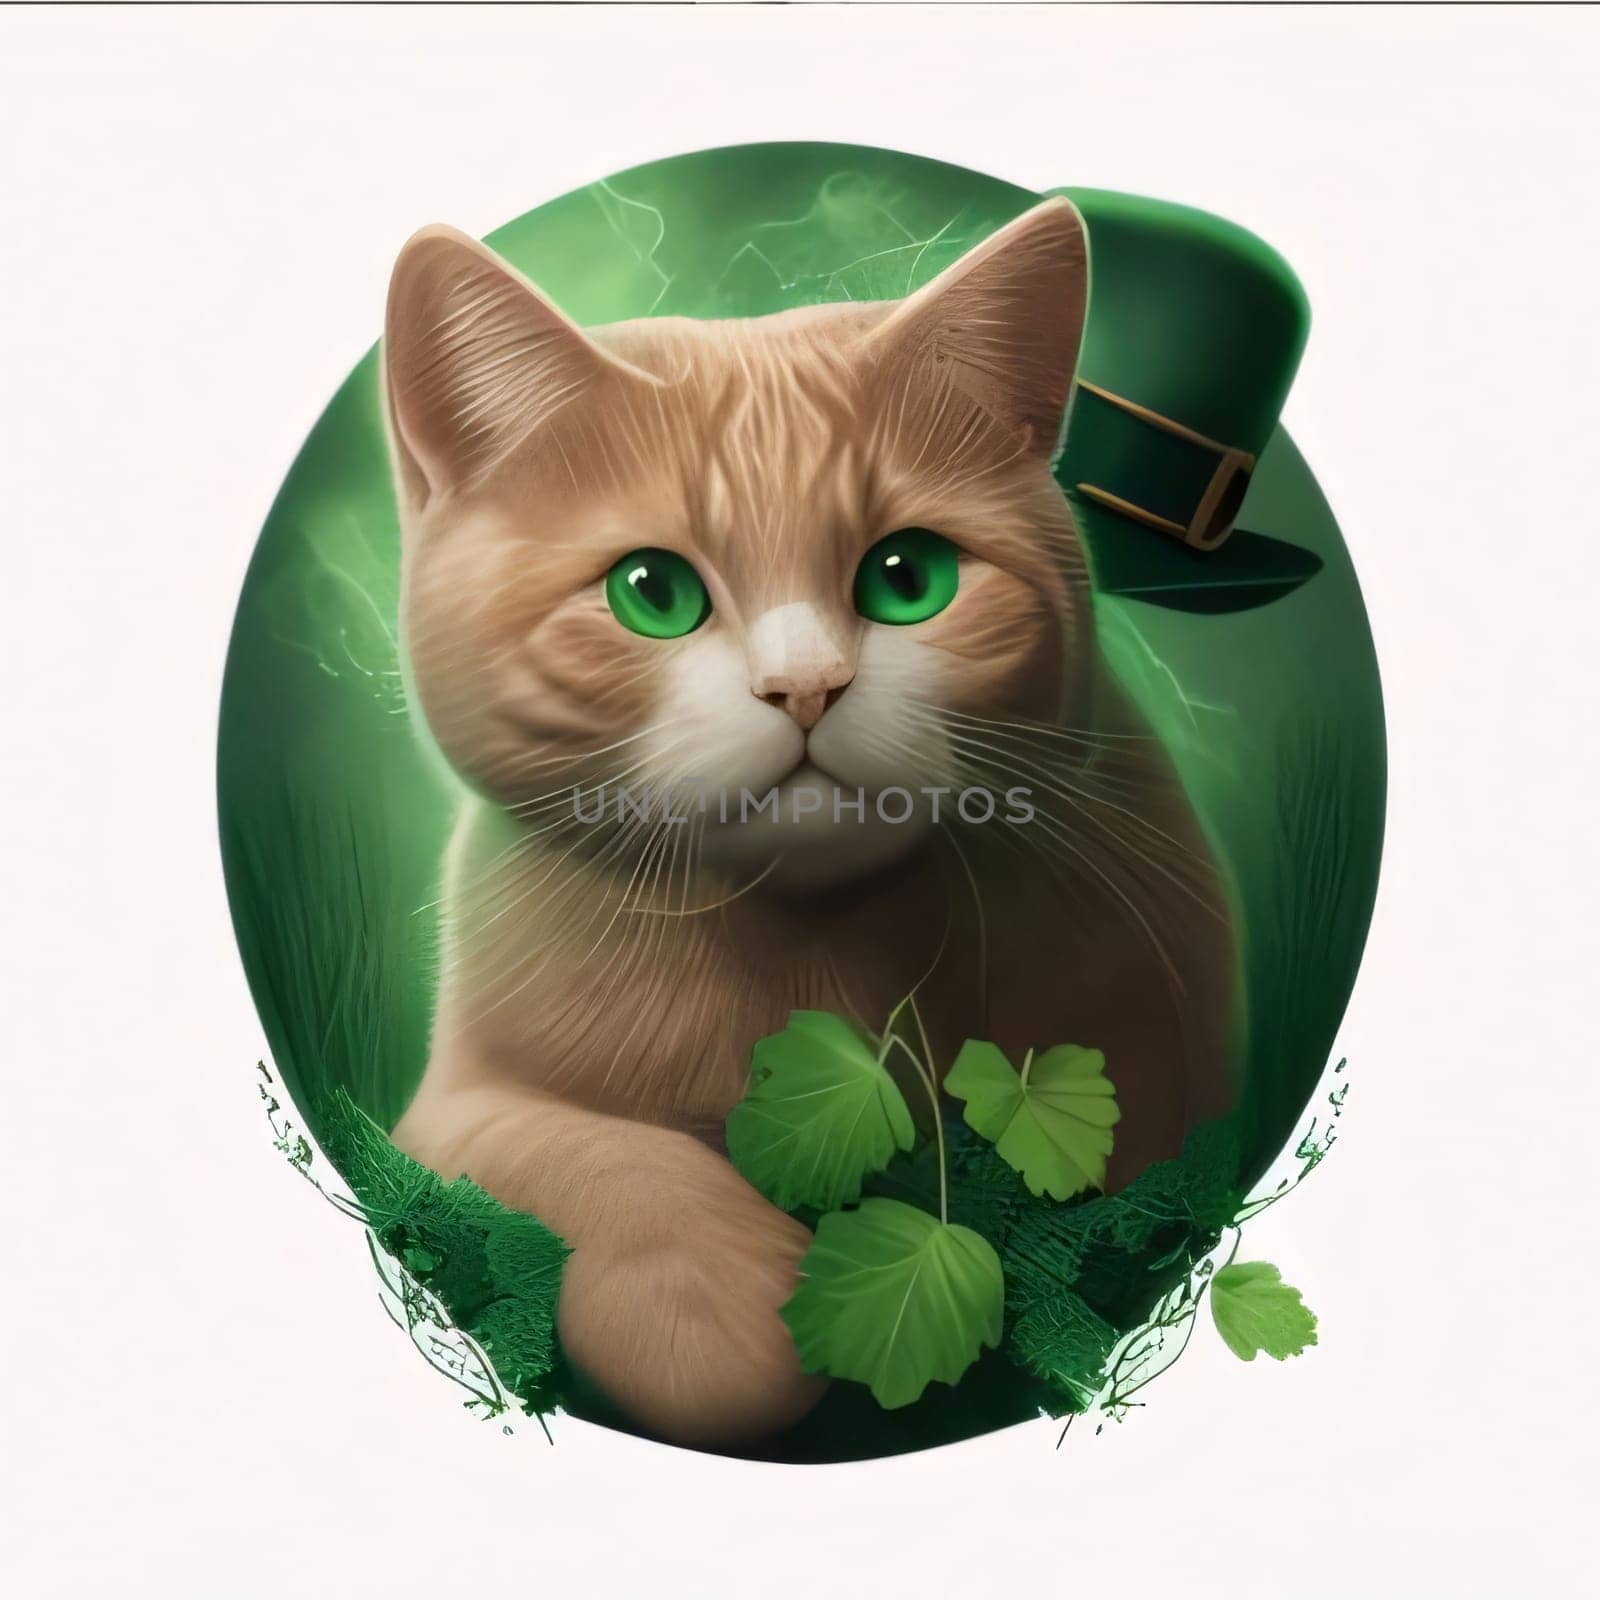 Small kitty in a circle with a green hat and Green leaves white background. Green color symbol of St. Patrick's Day. A joyous time of celebration in green color.